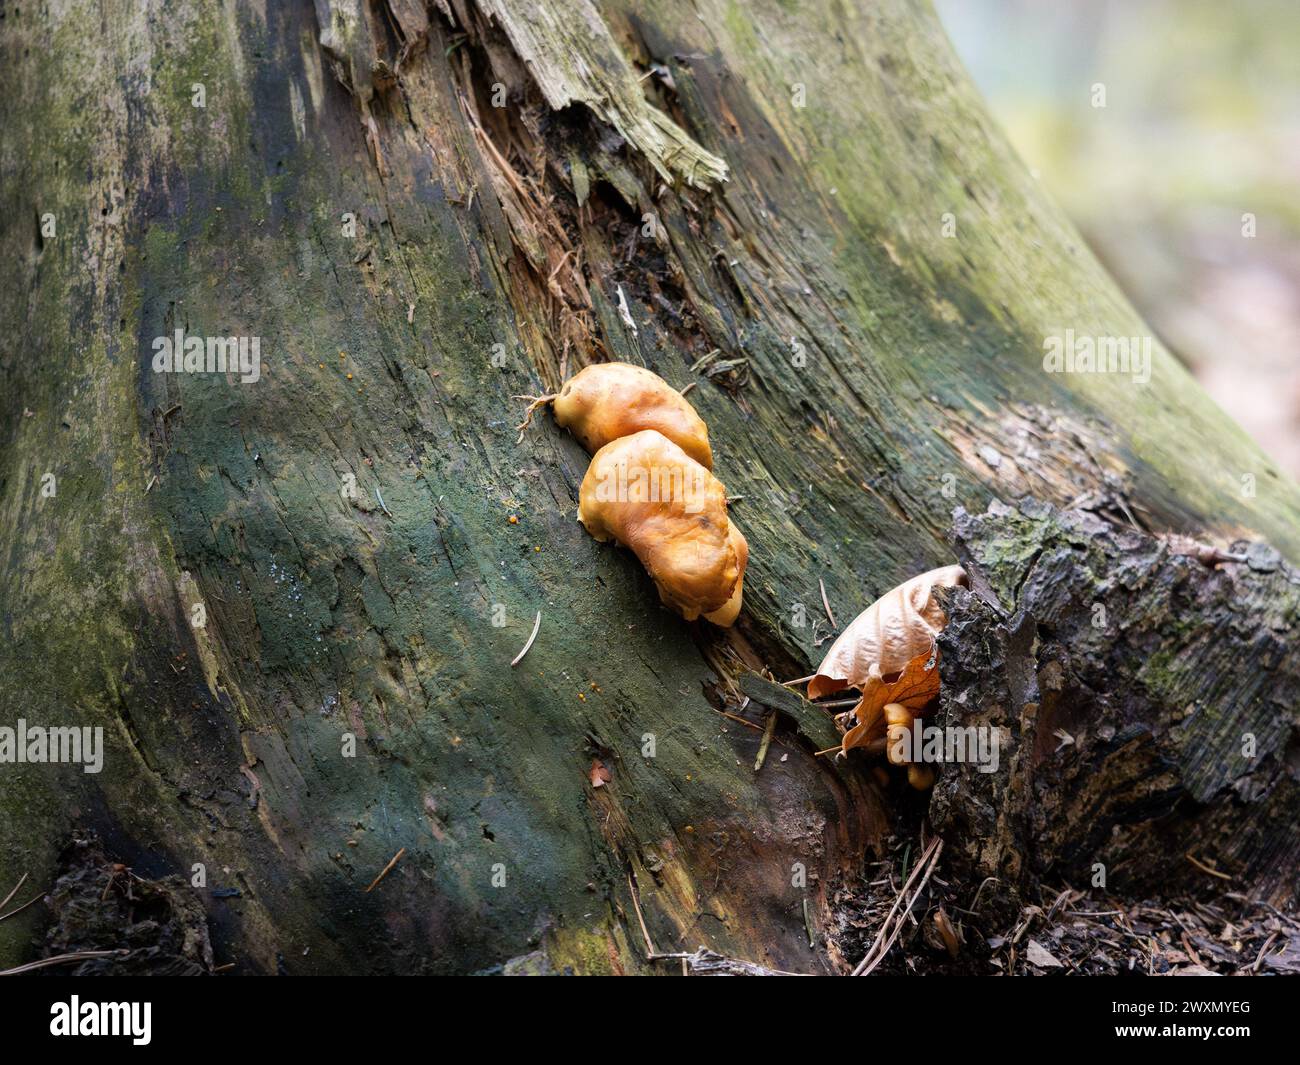 Orange fungus on a tree trunk in a forest in europe. Close up of plant part in the nature. Stock Photo